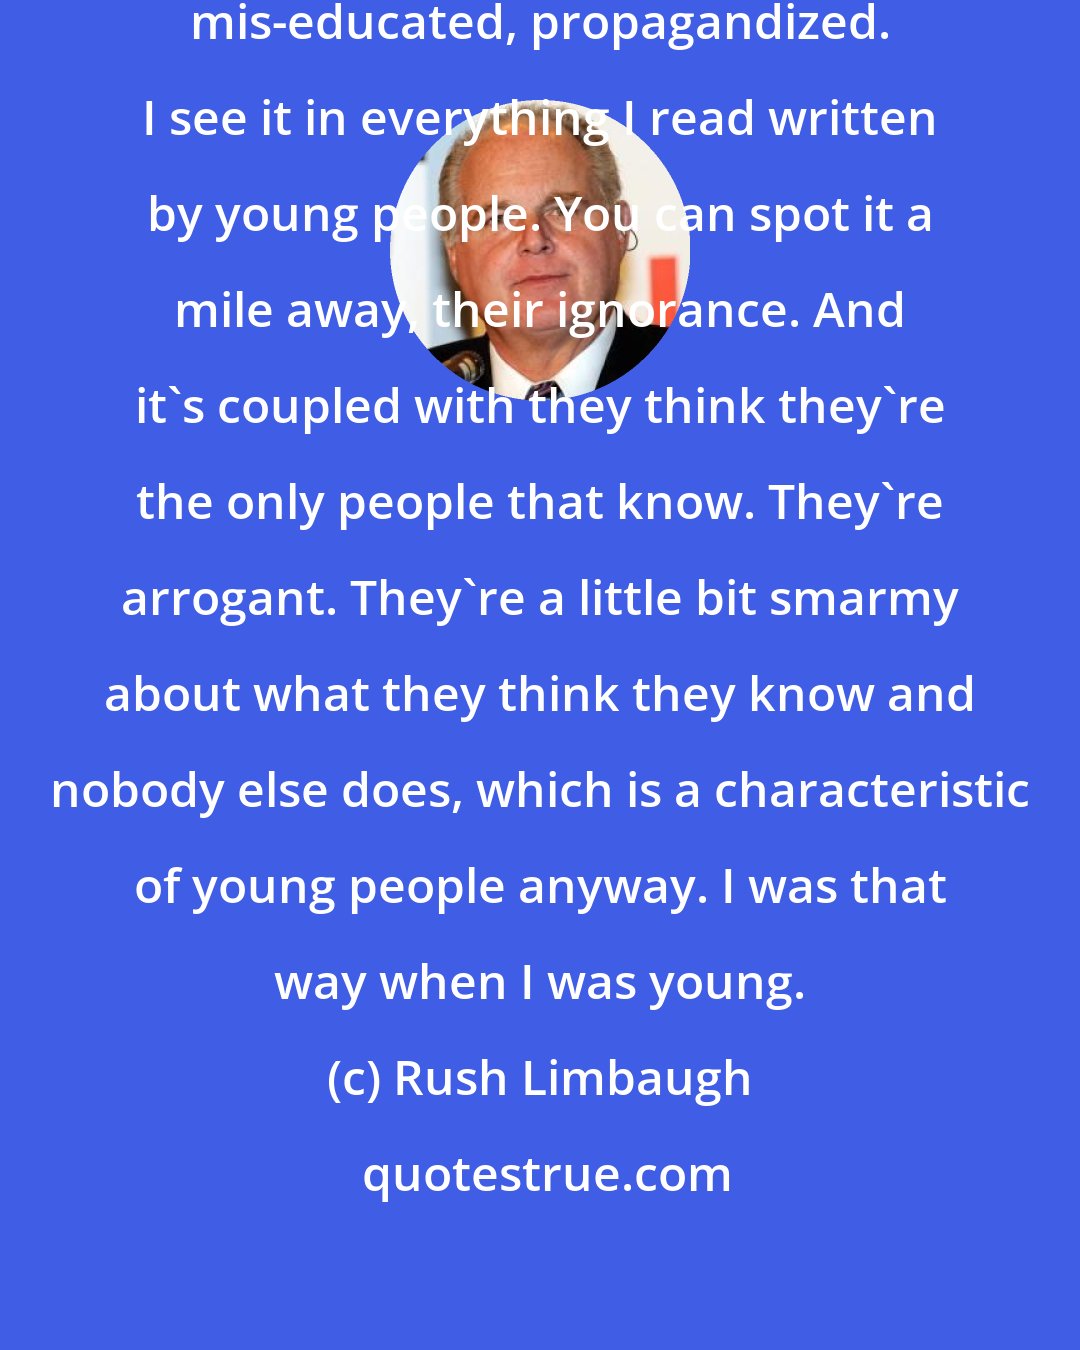 Rush Limbaugh: Young people have been ill-educated, mis-educated, propagandized. I see it in everything I read written by young people. You can spot it a mile away, their ignorance. And it's coupled with they think they're the only people that know. They're arrogant. They're a little bit smarmy about what they think they know and nobody else does, which is a characteristic of young people anyway. I was that way when I was young.